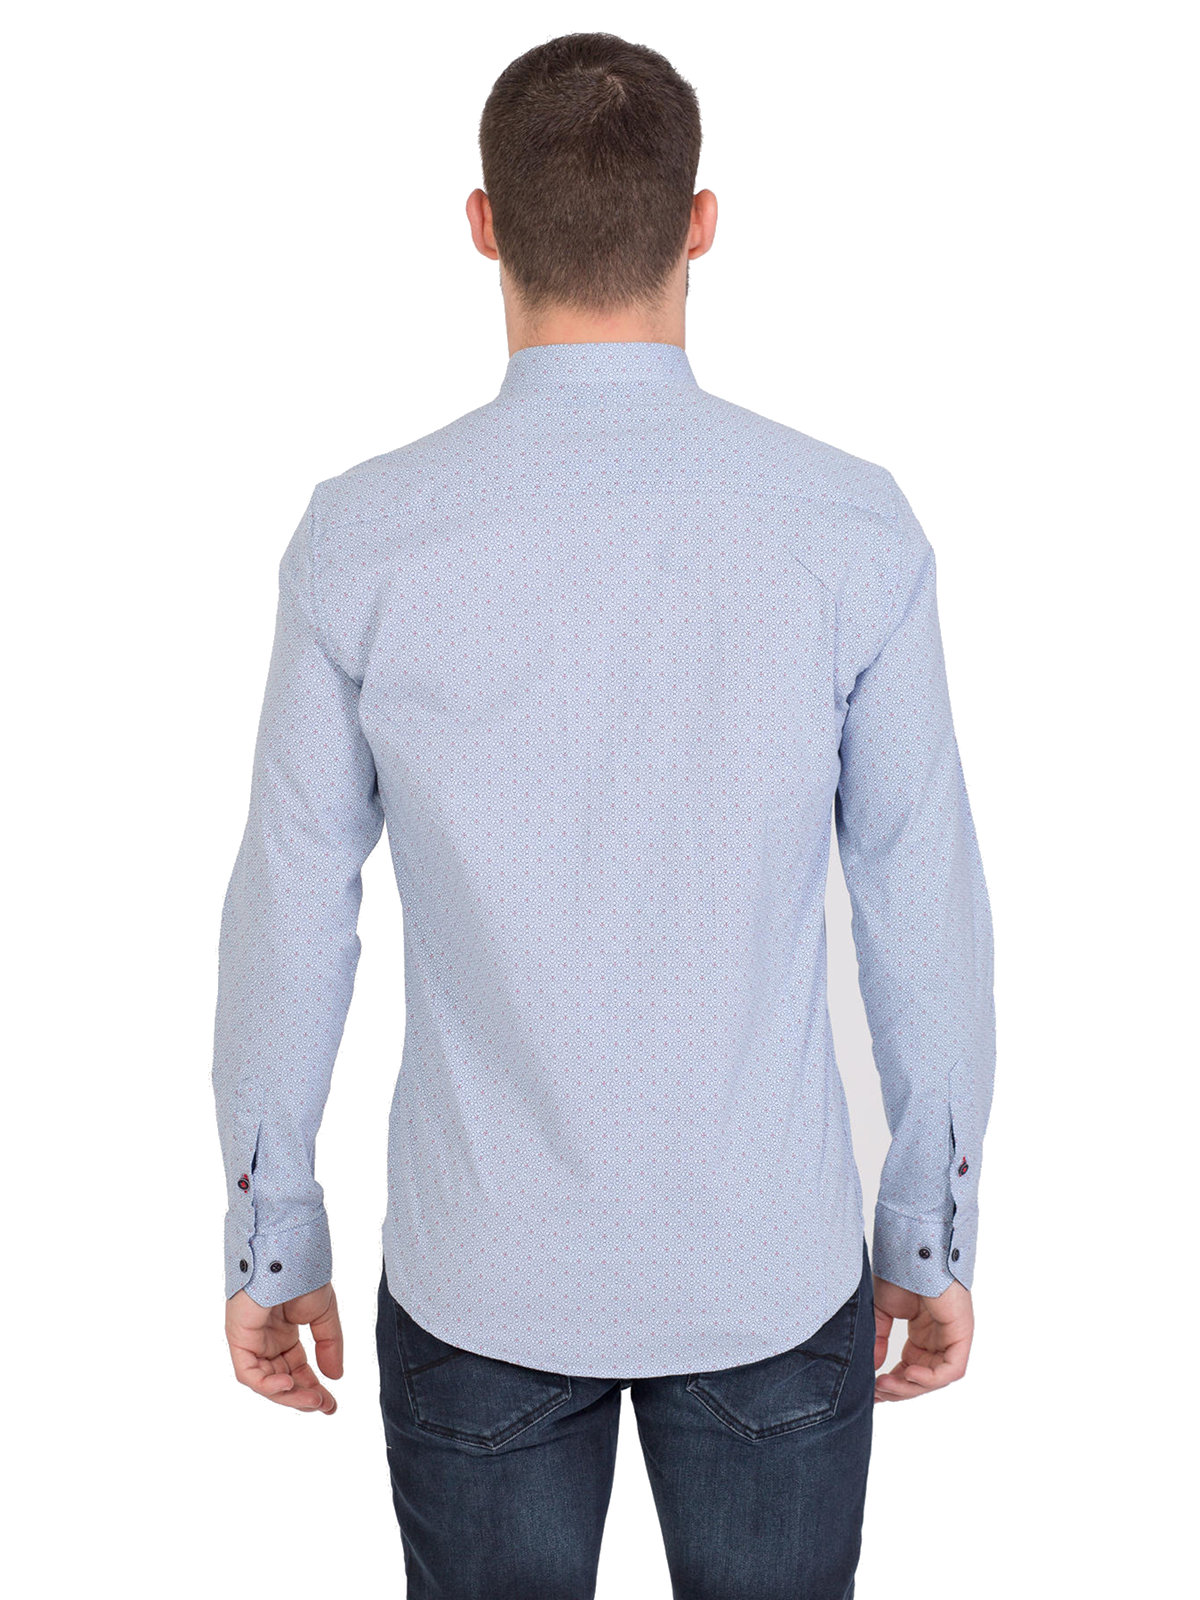 Shirt in blue with small red figures - 21440 € 21.93 img2